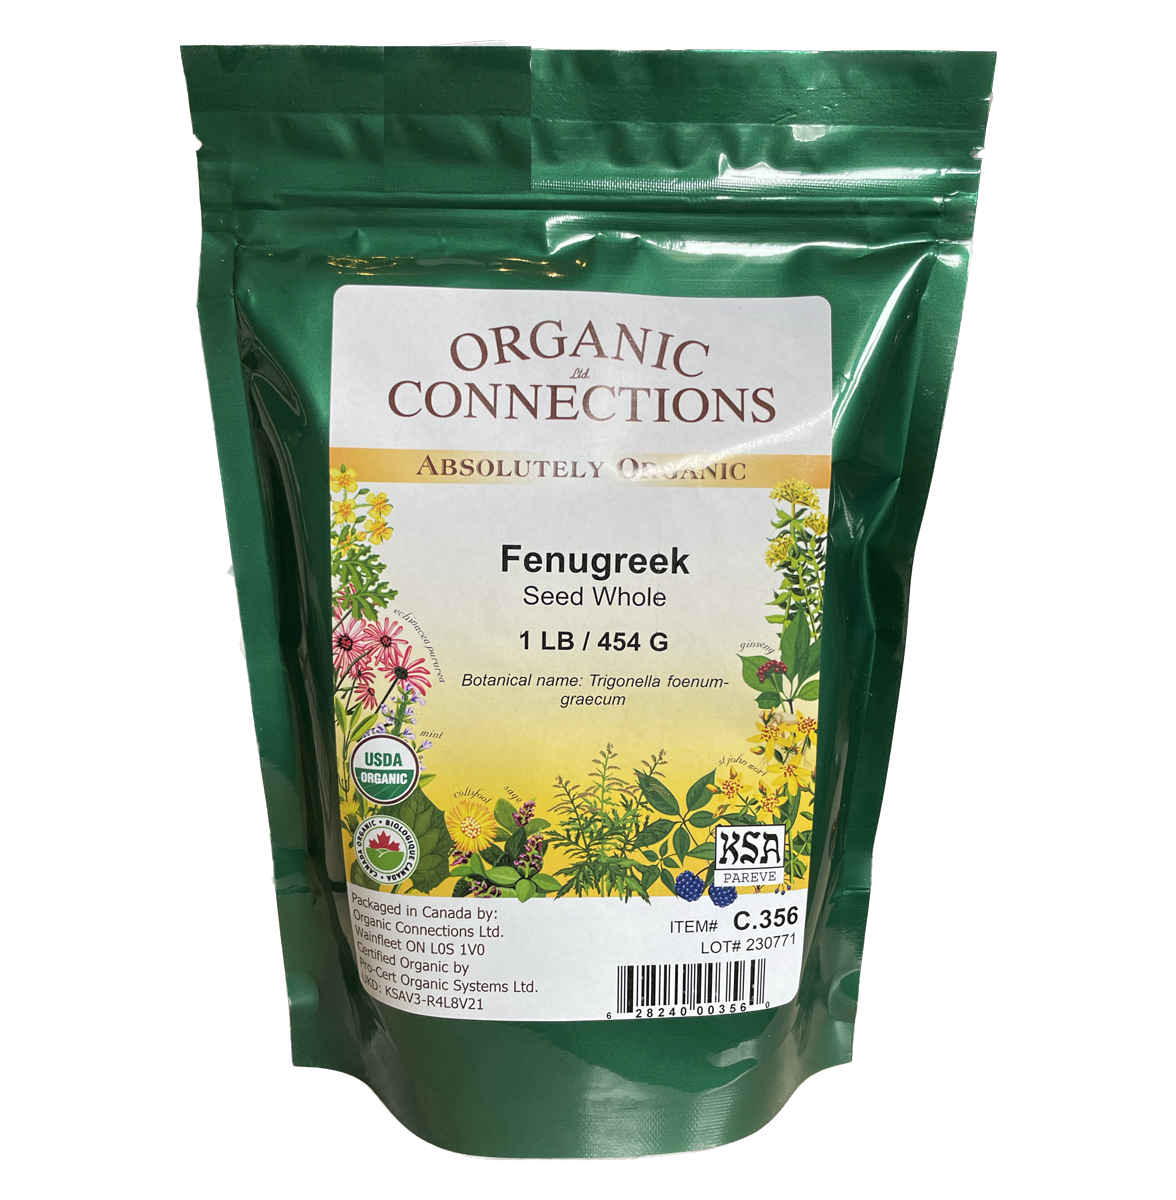 Organic Connections Fenugreek Seed Whole 454g